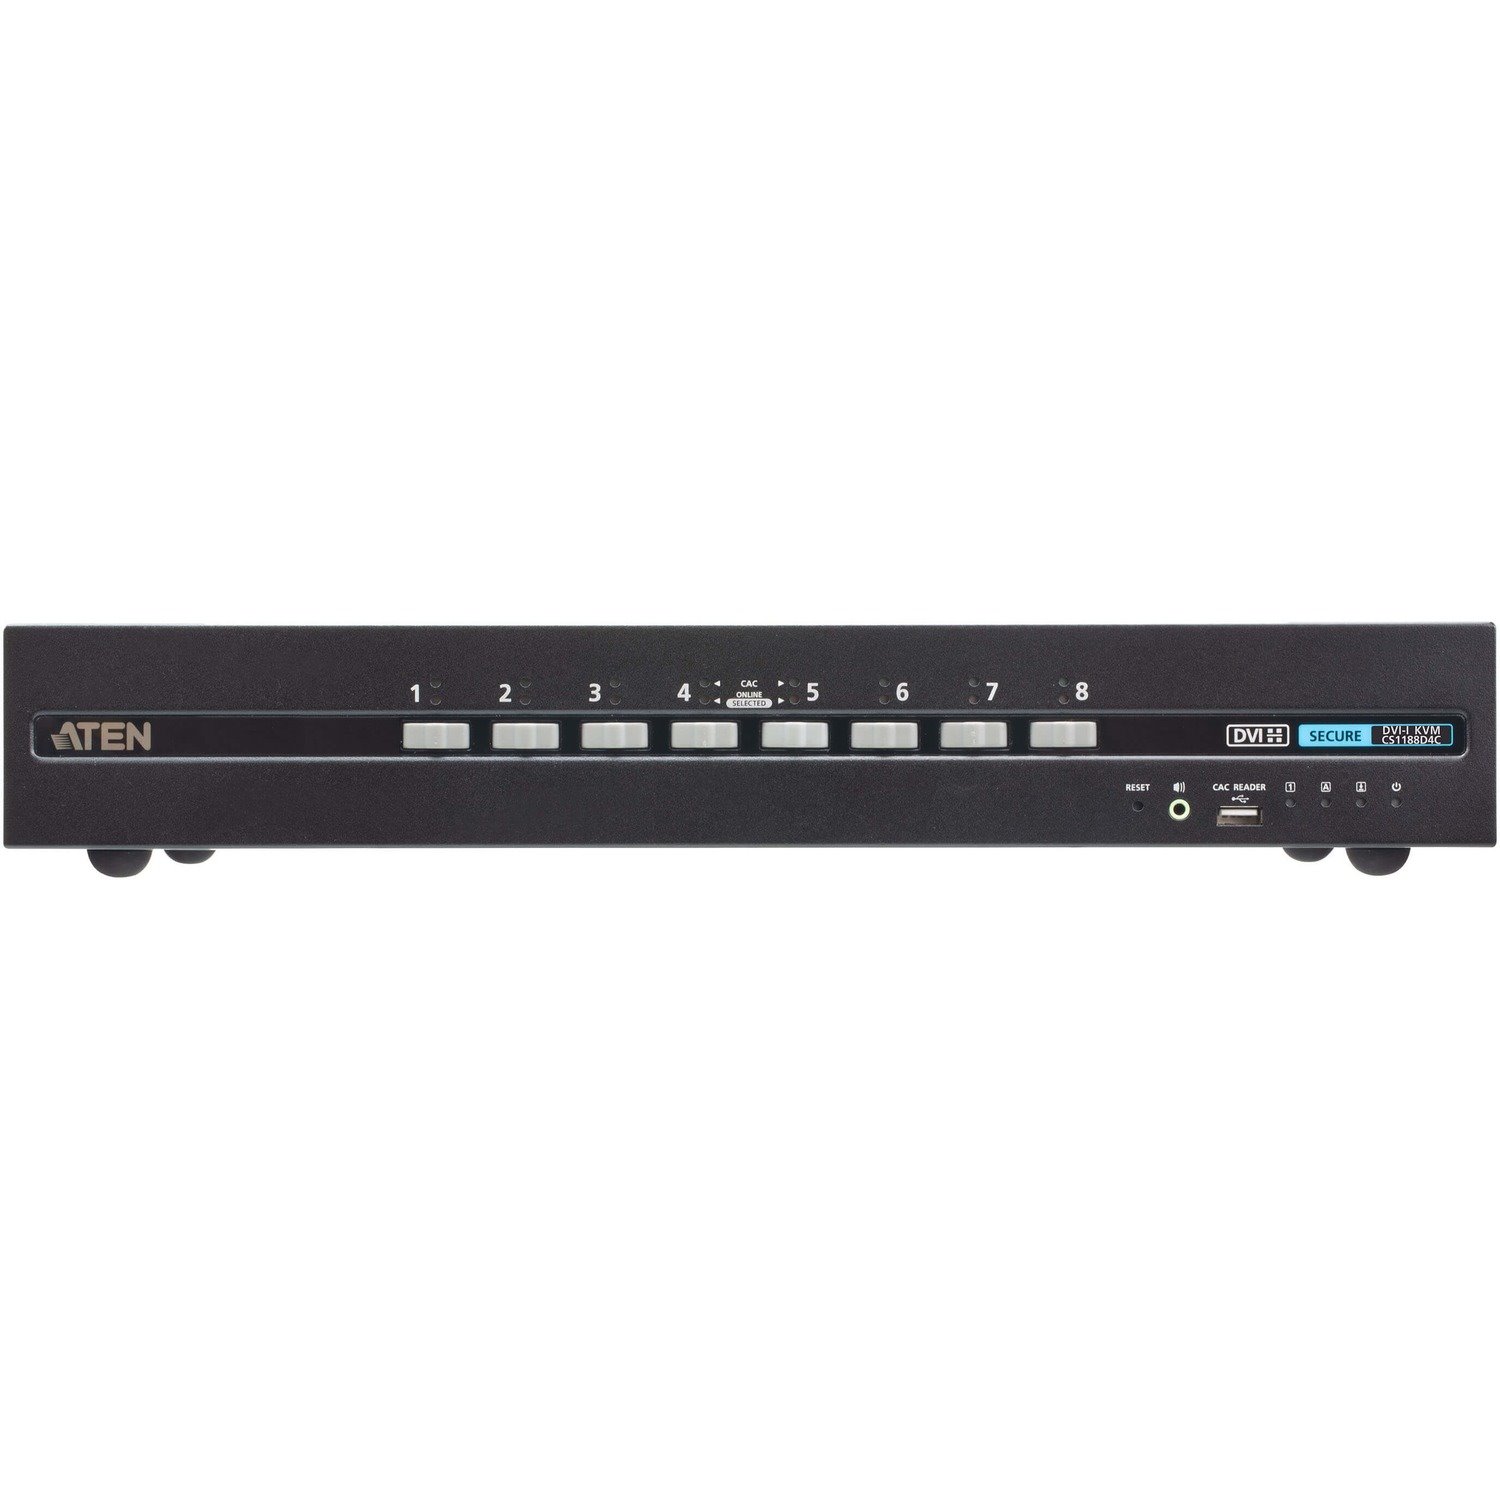 ATEN 8-Port USB DVI Secure KVM Switch with CAC (PSD PP v4.0 Compliant)